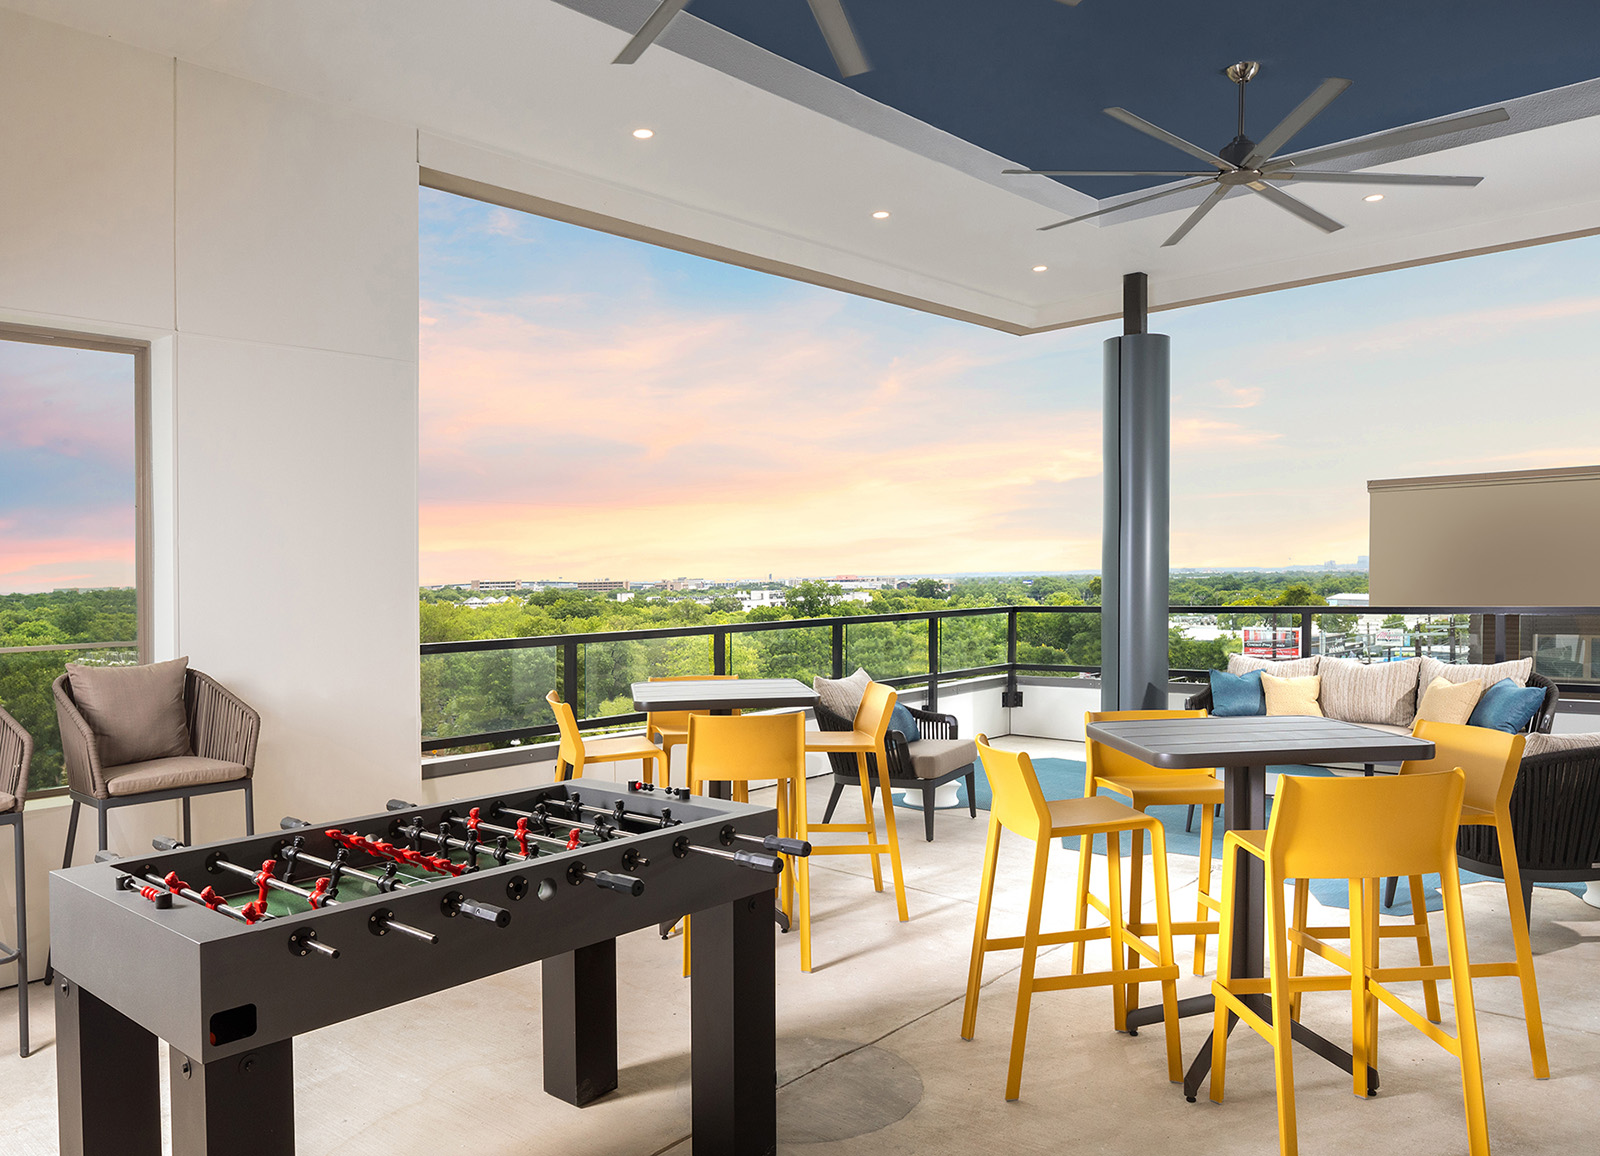 Open air rooftop lounge with yellow chairs, table game, and view of horizon at AVE Austin apartment building. 